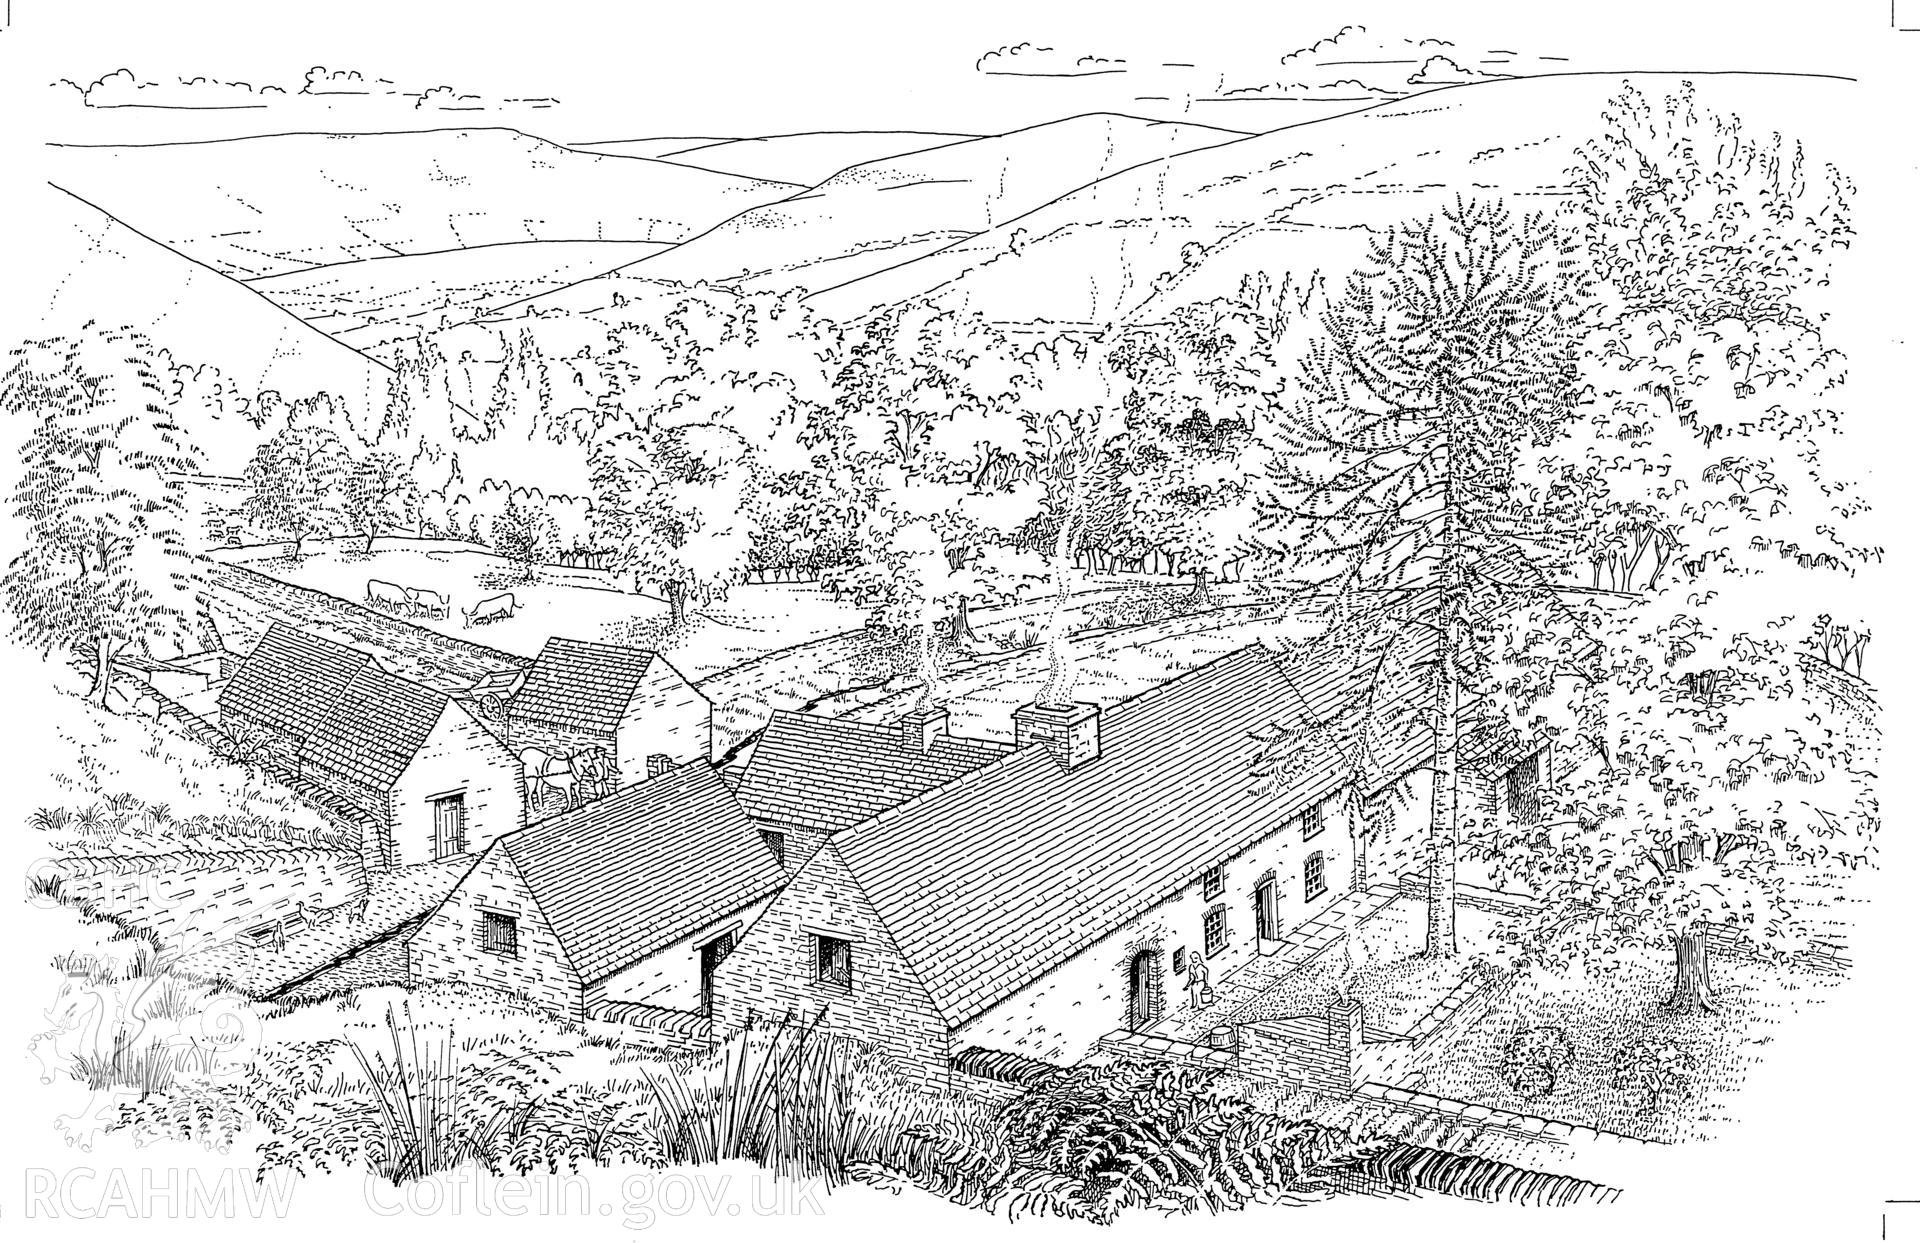 Nant y Bar Farmstead, Glynncorrwg; copy of a perspective reconstruction drawing produced by Geoff Ward, c.1988